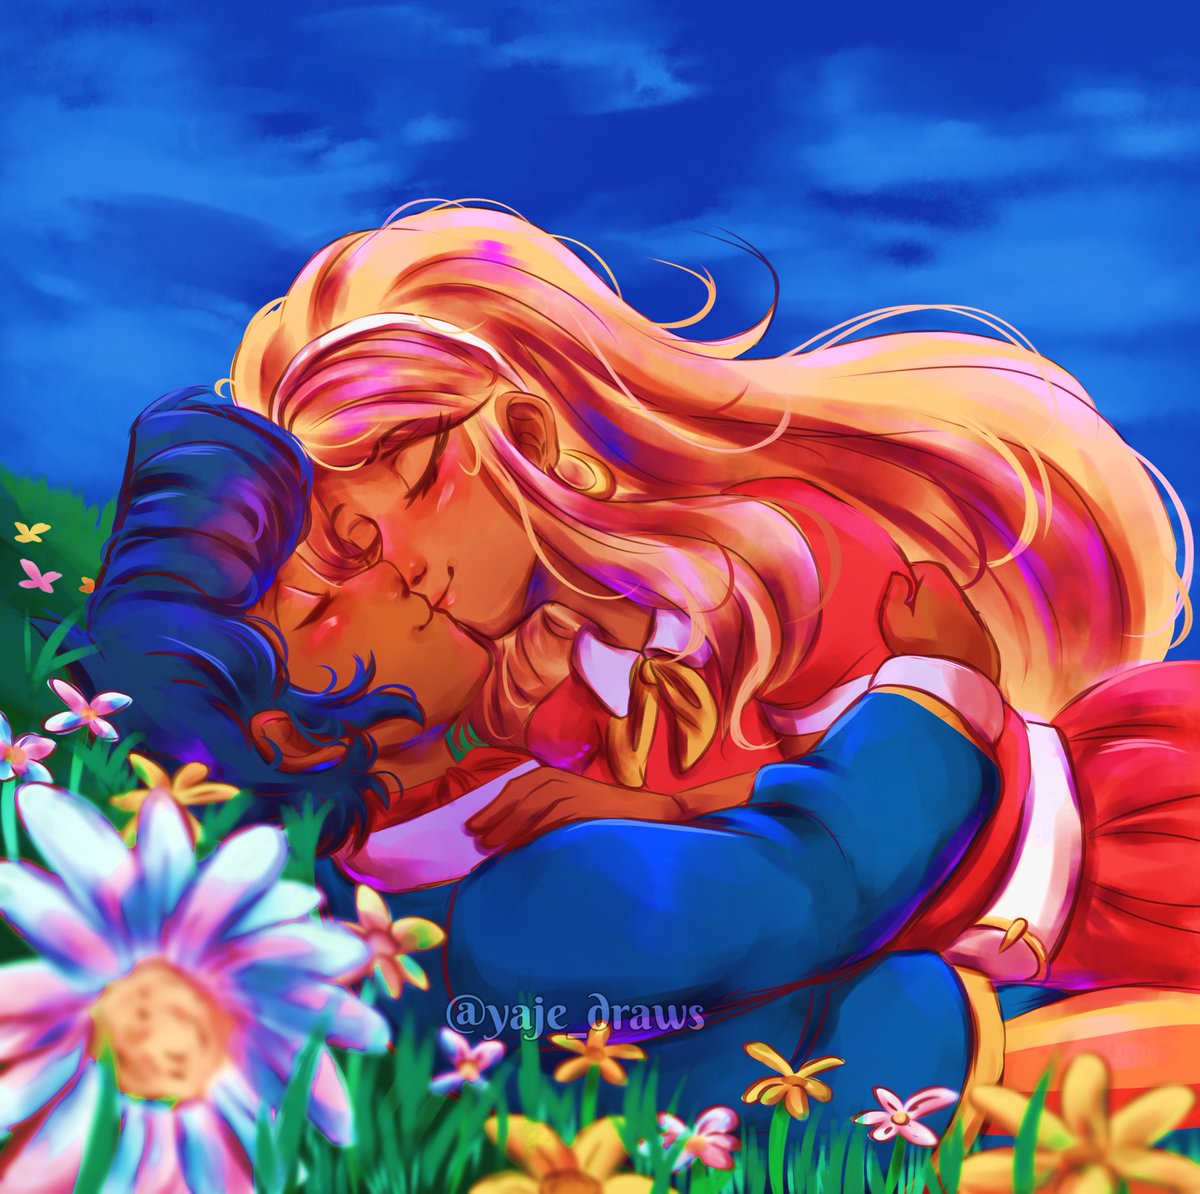 Appleblossom🍎🌸🌄

Idk how to render, I wanted to practice with this drawing, anyway, I love these babies very much😔💕💕

#WelcomeHome #WallyDarling #JulieJoyful #AppleBlossom #WallyxJulie #fanart #digitalart #myart